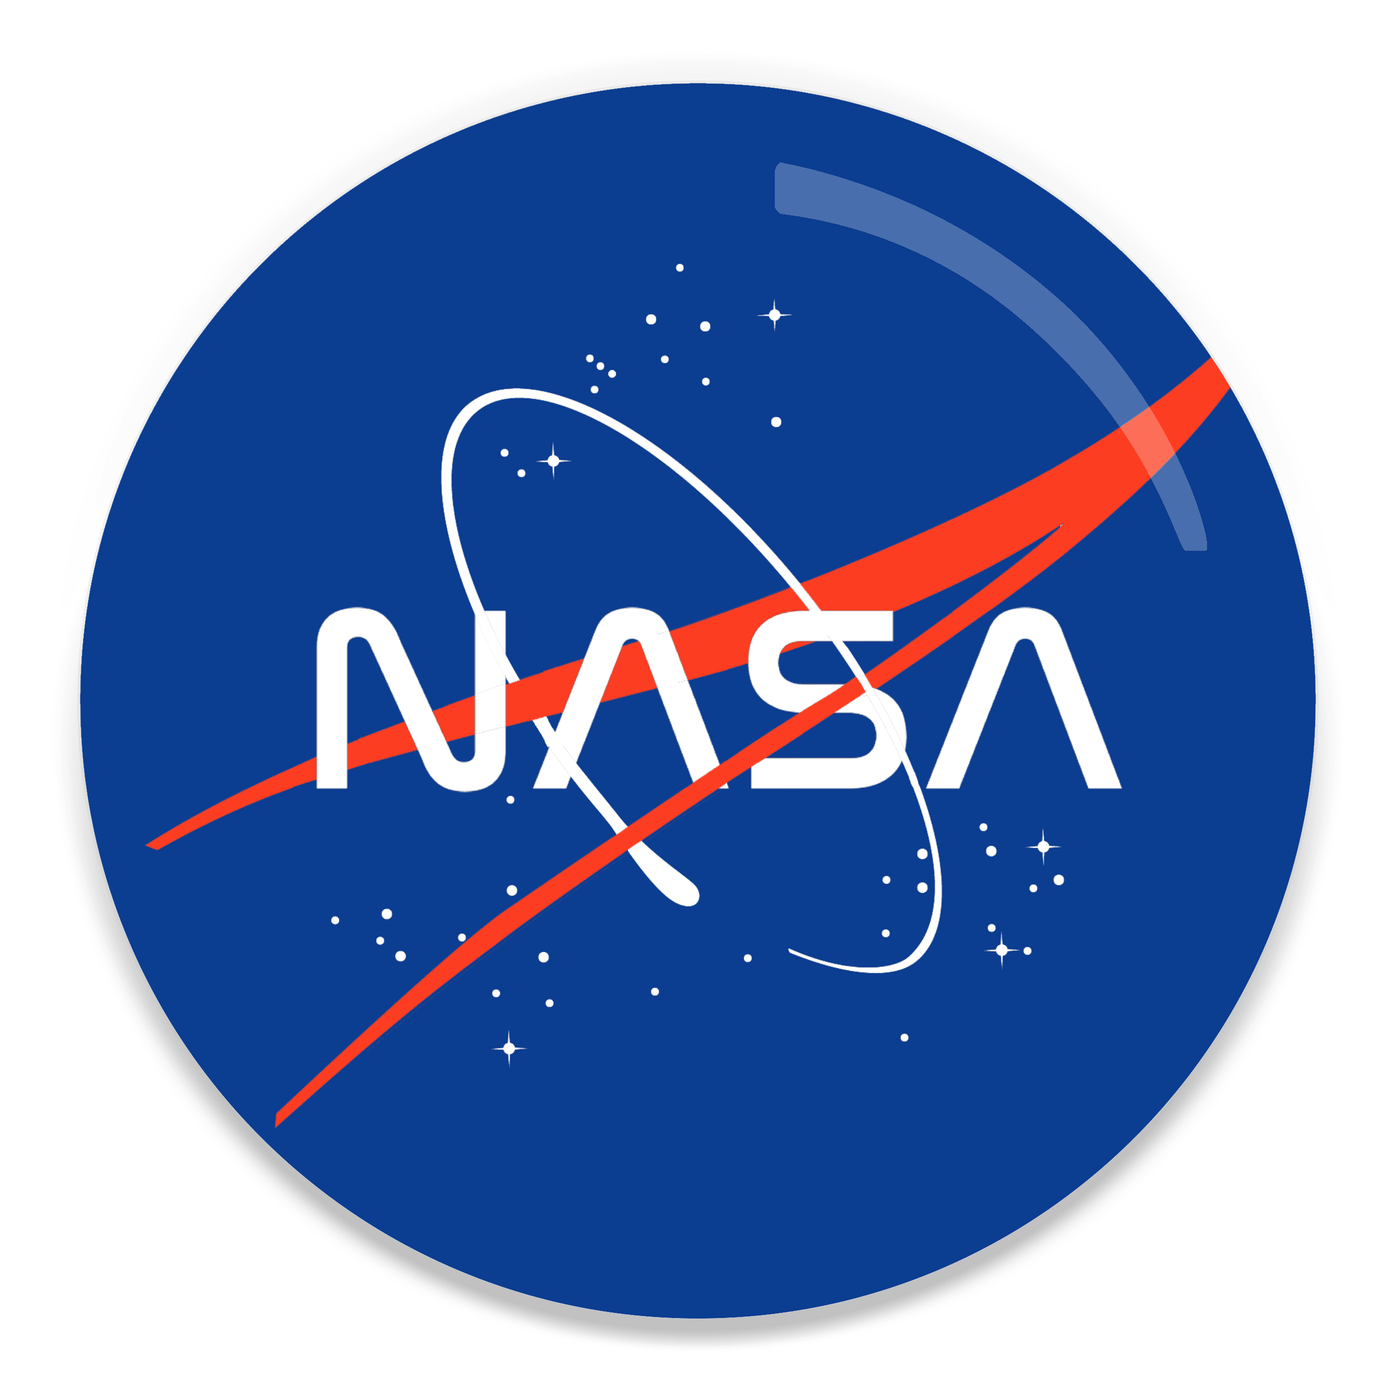 2.25 inch round colorful magnet with image of the nasa meatball